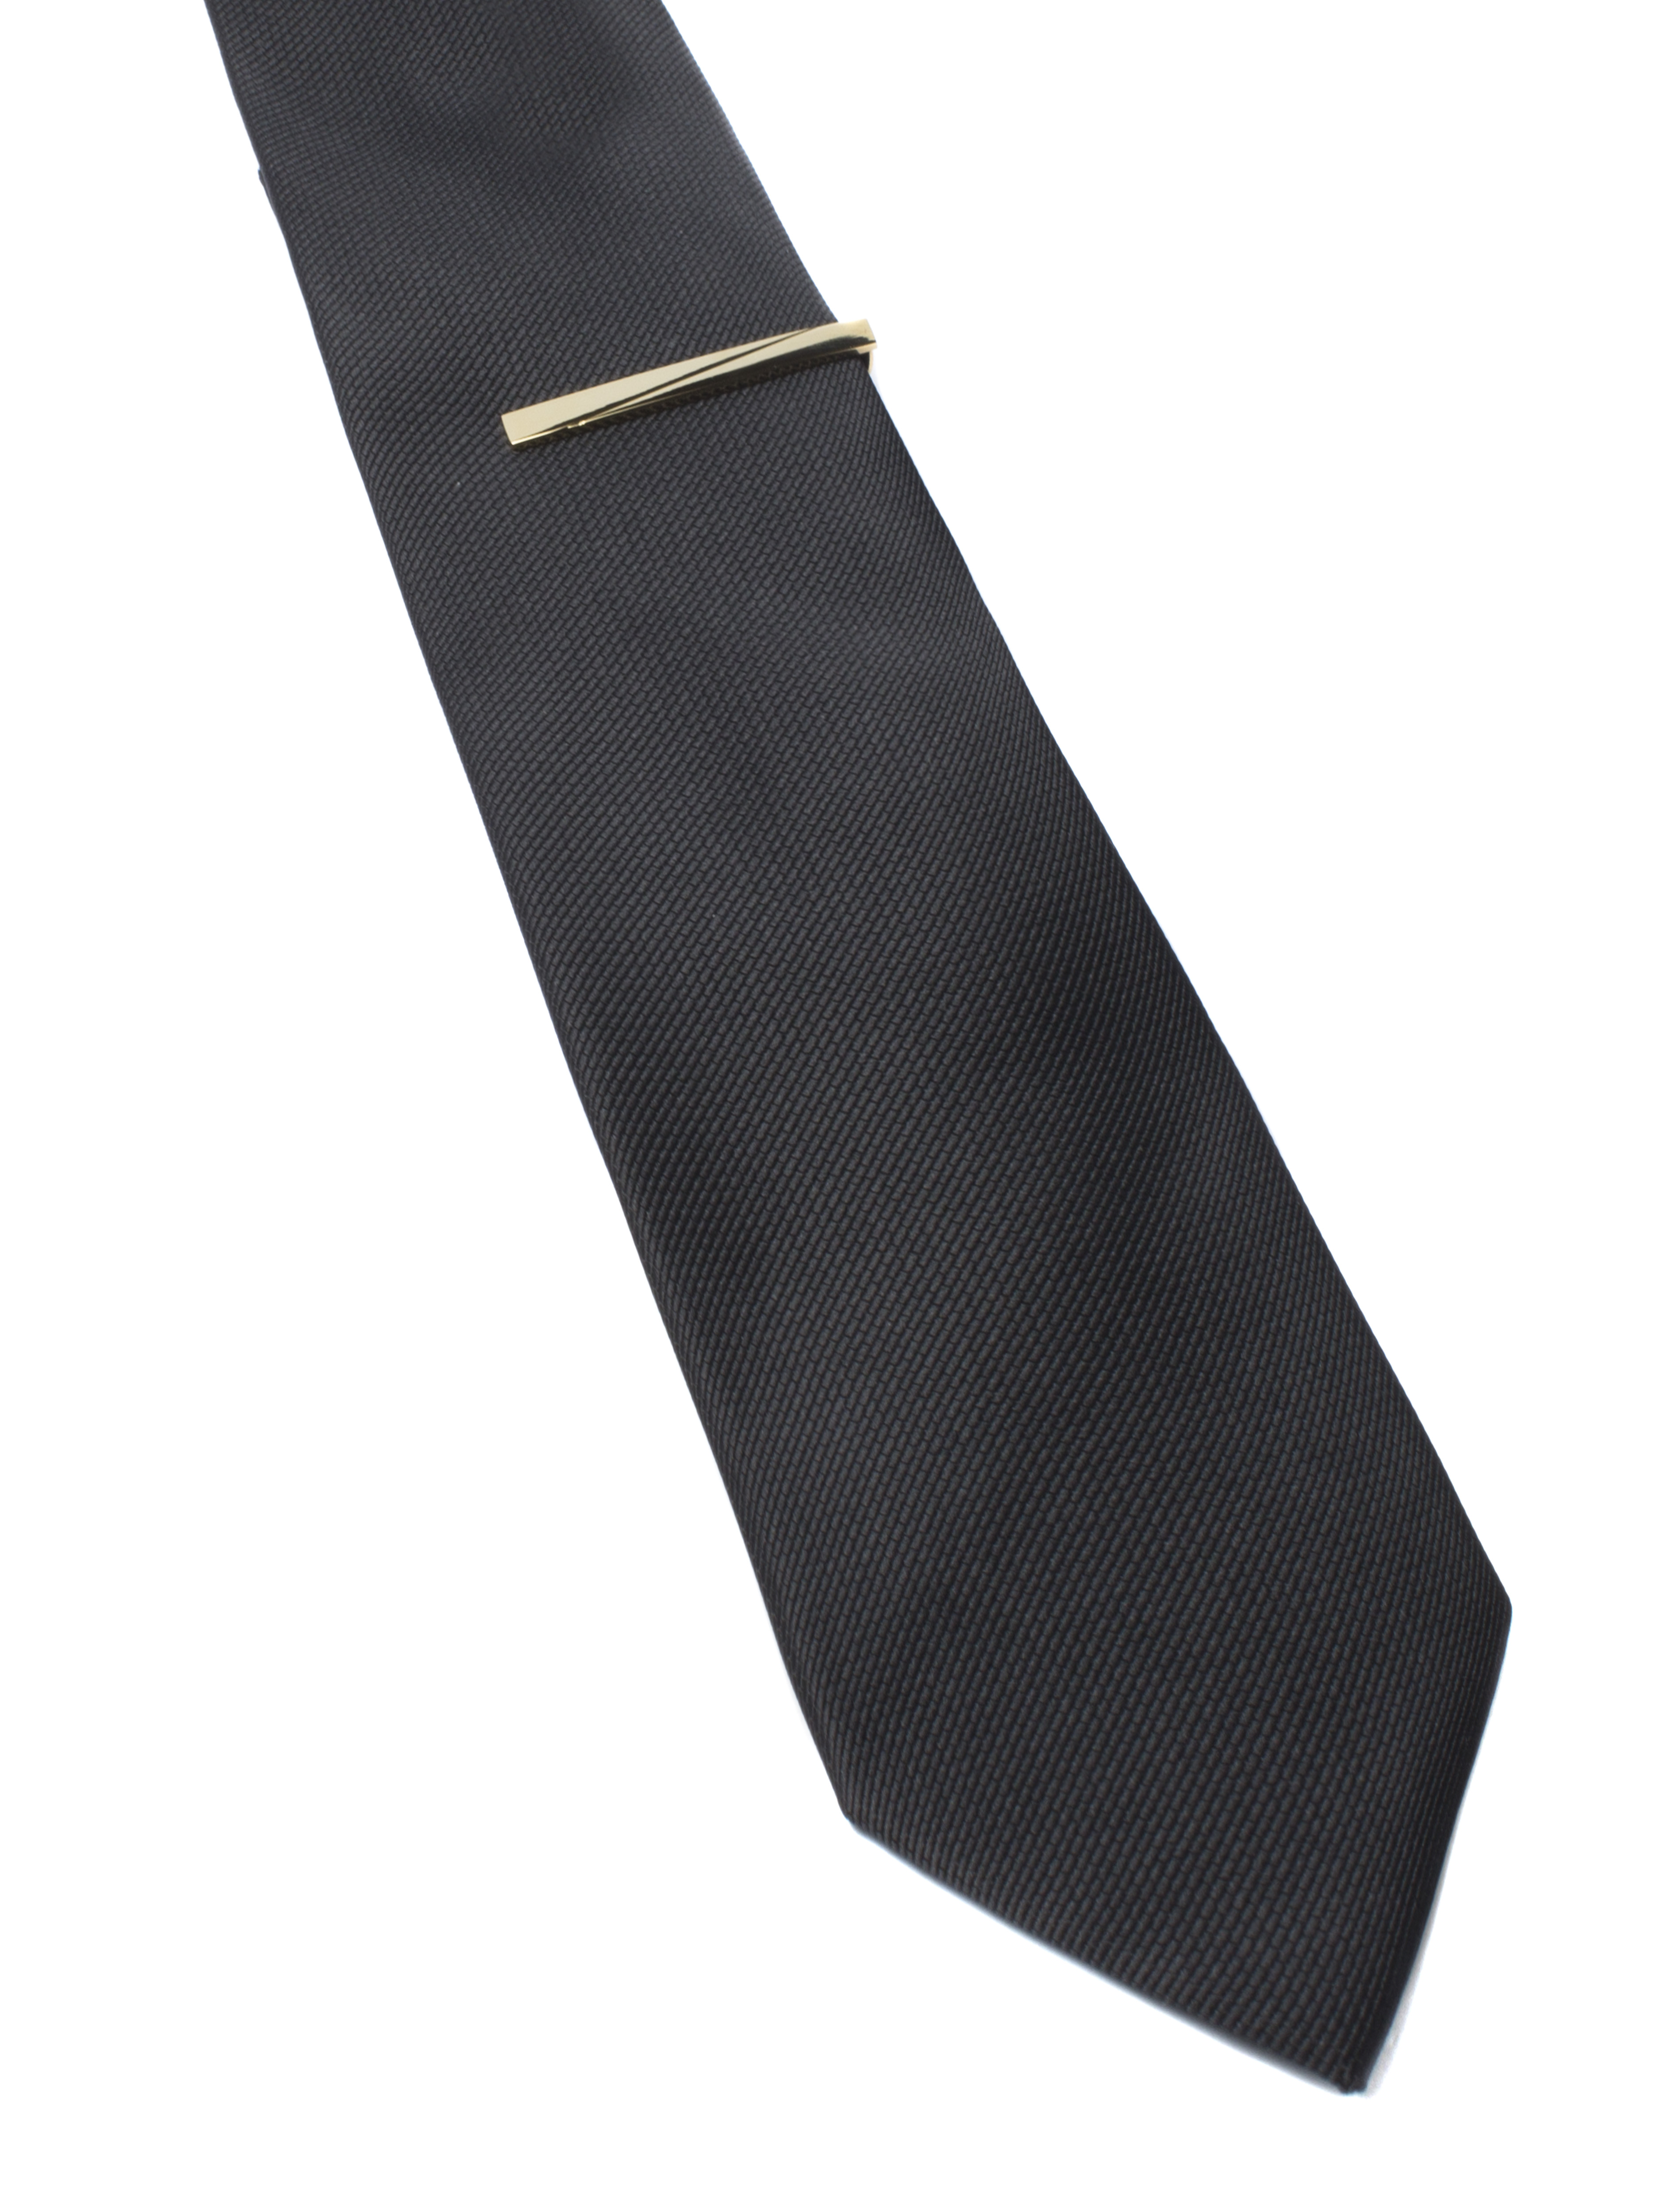 Tie Tack - Gold Brushed